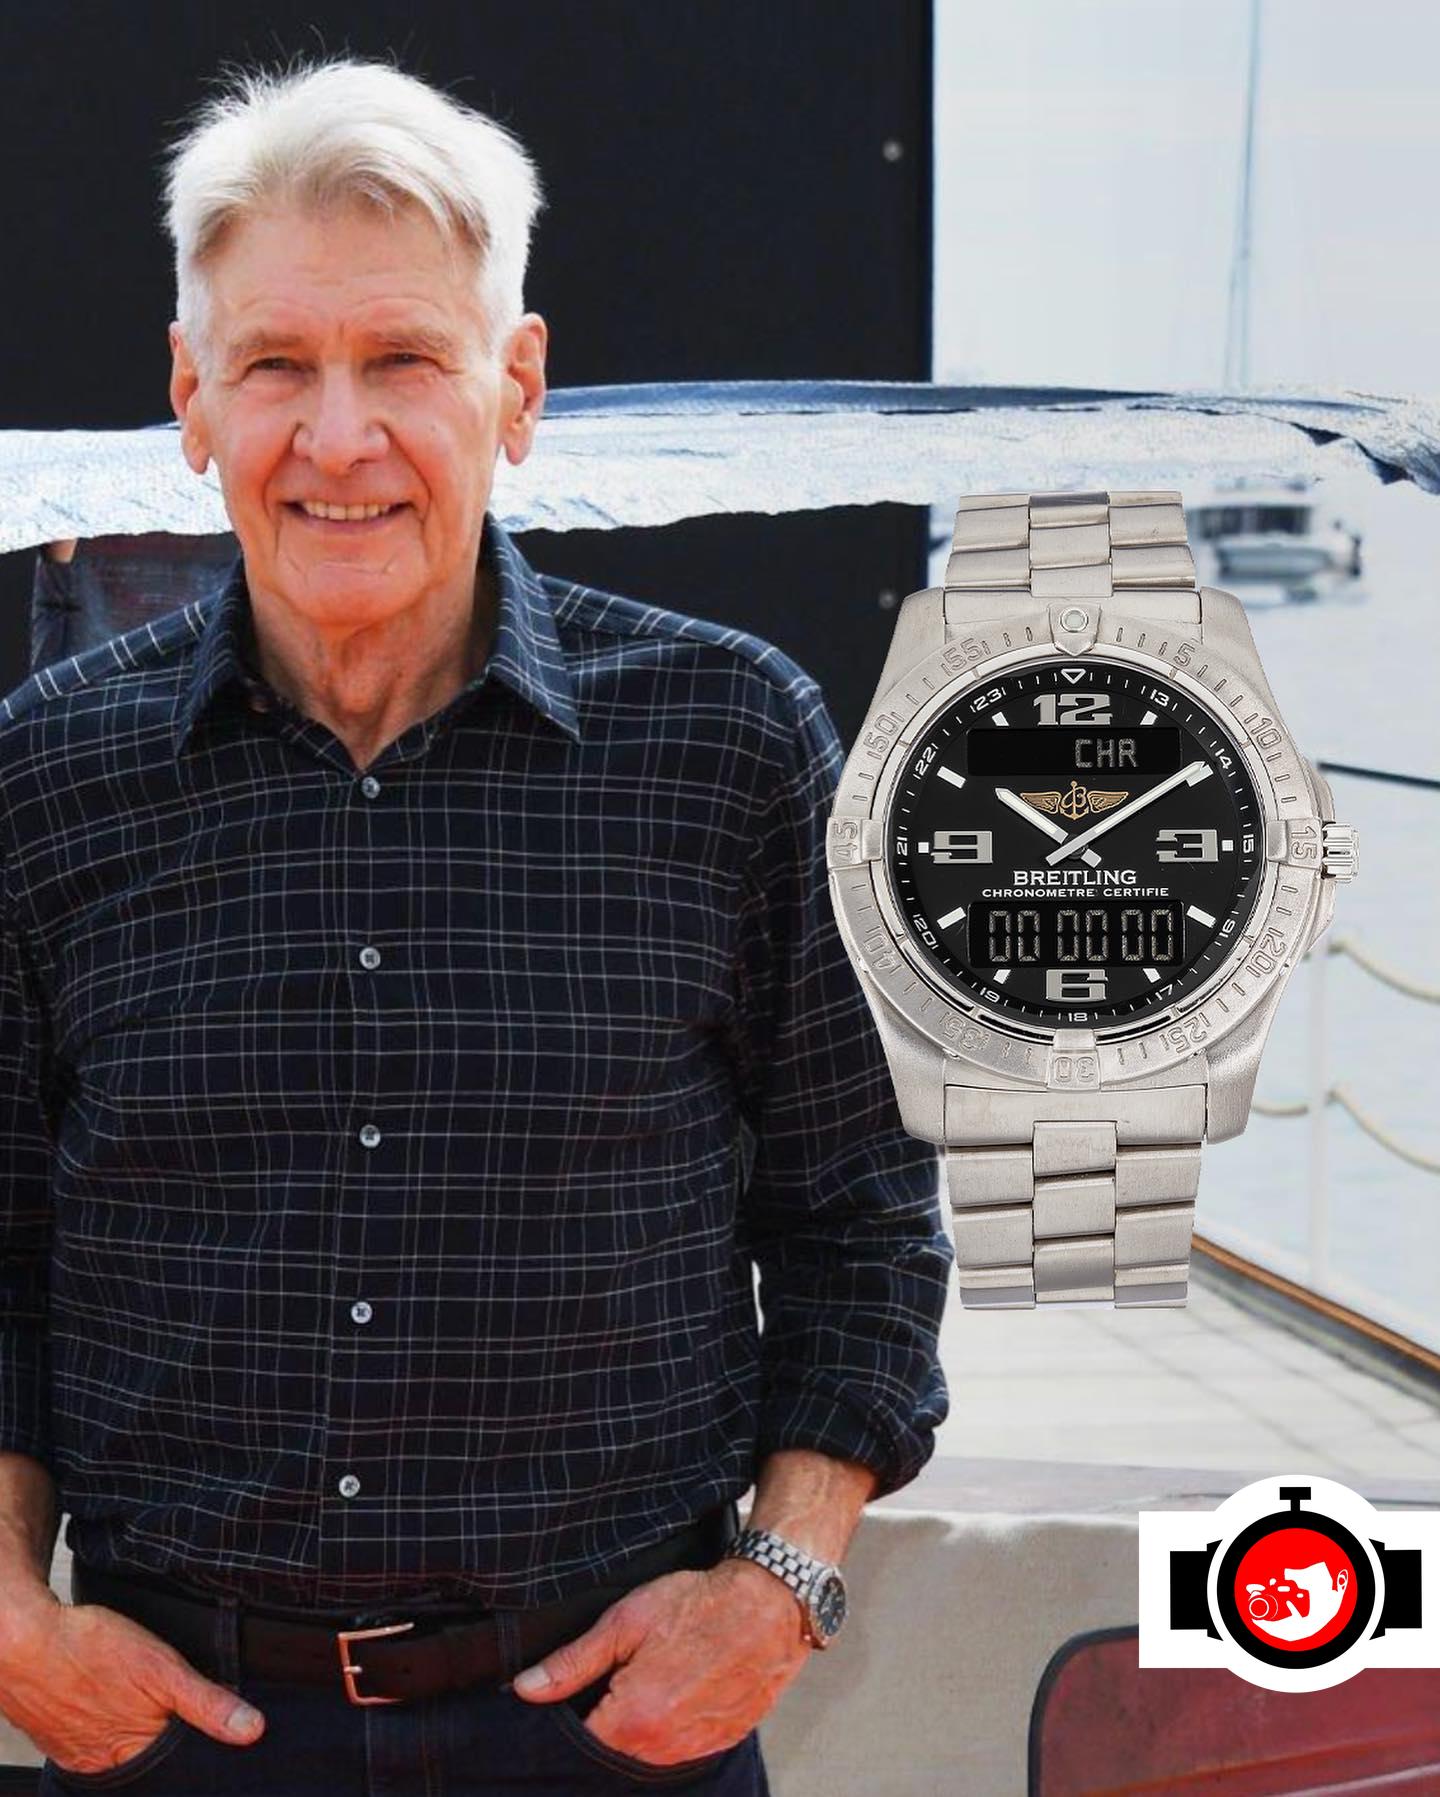 Harrison Ford's Favorite Watch: The Breitling Aerospace Avantage